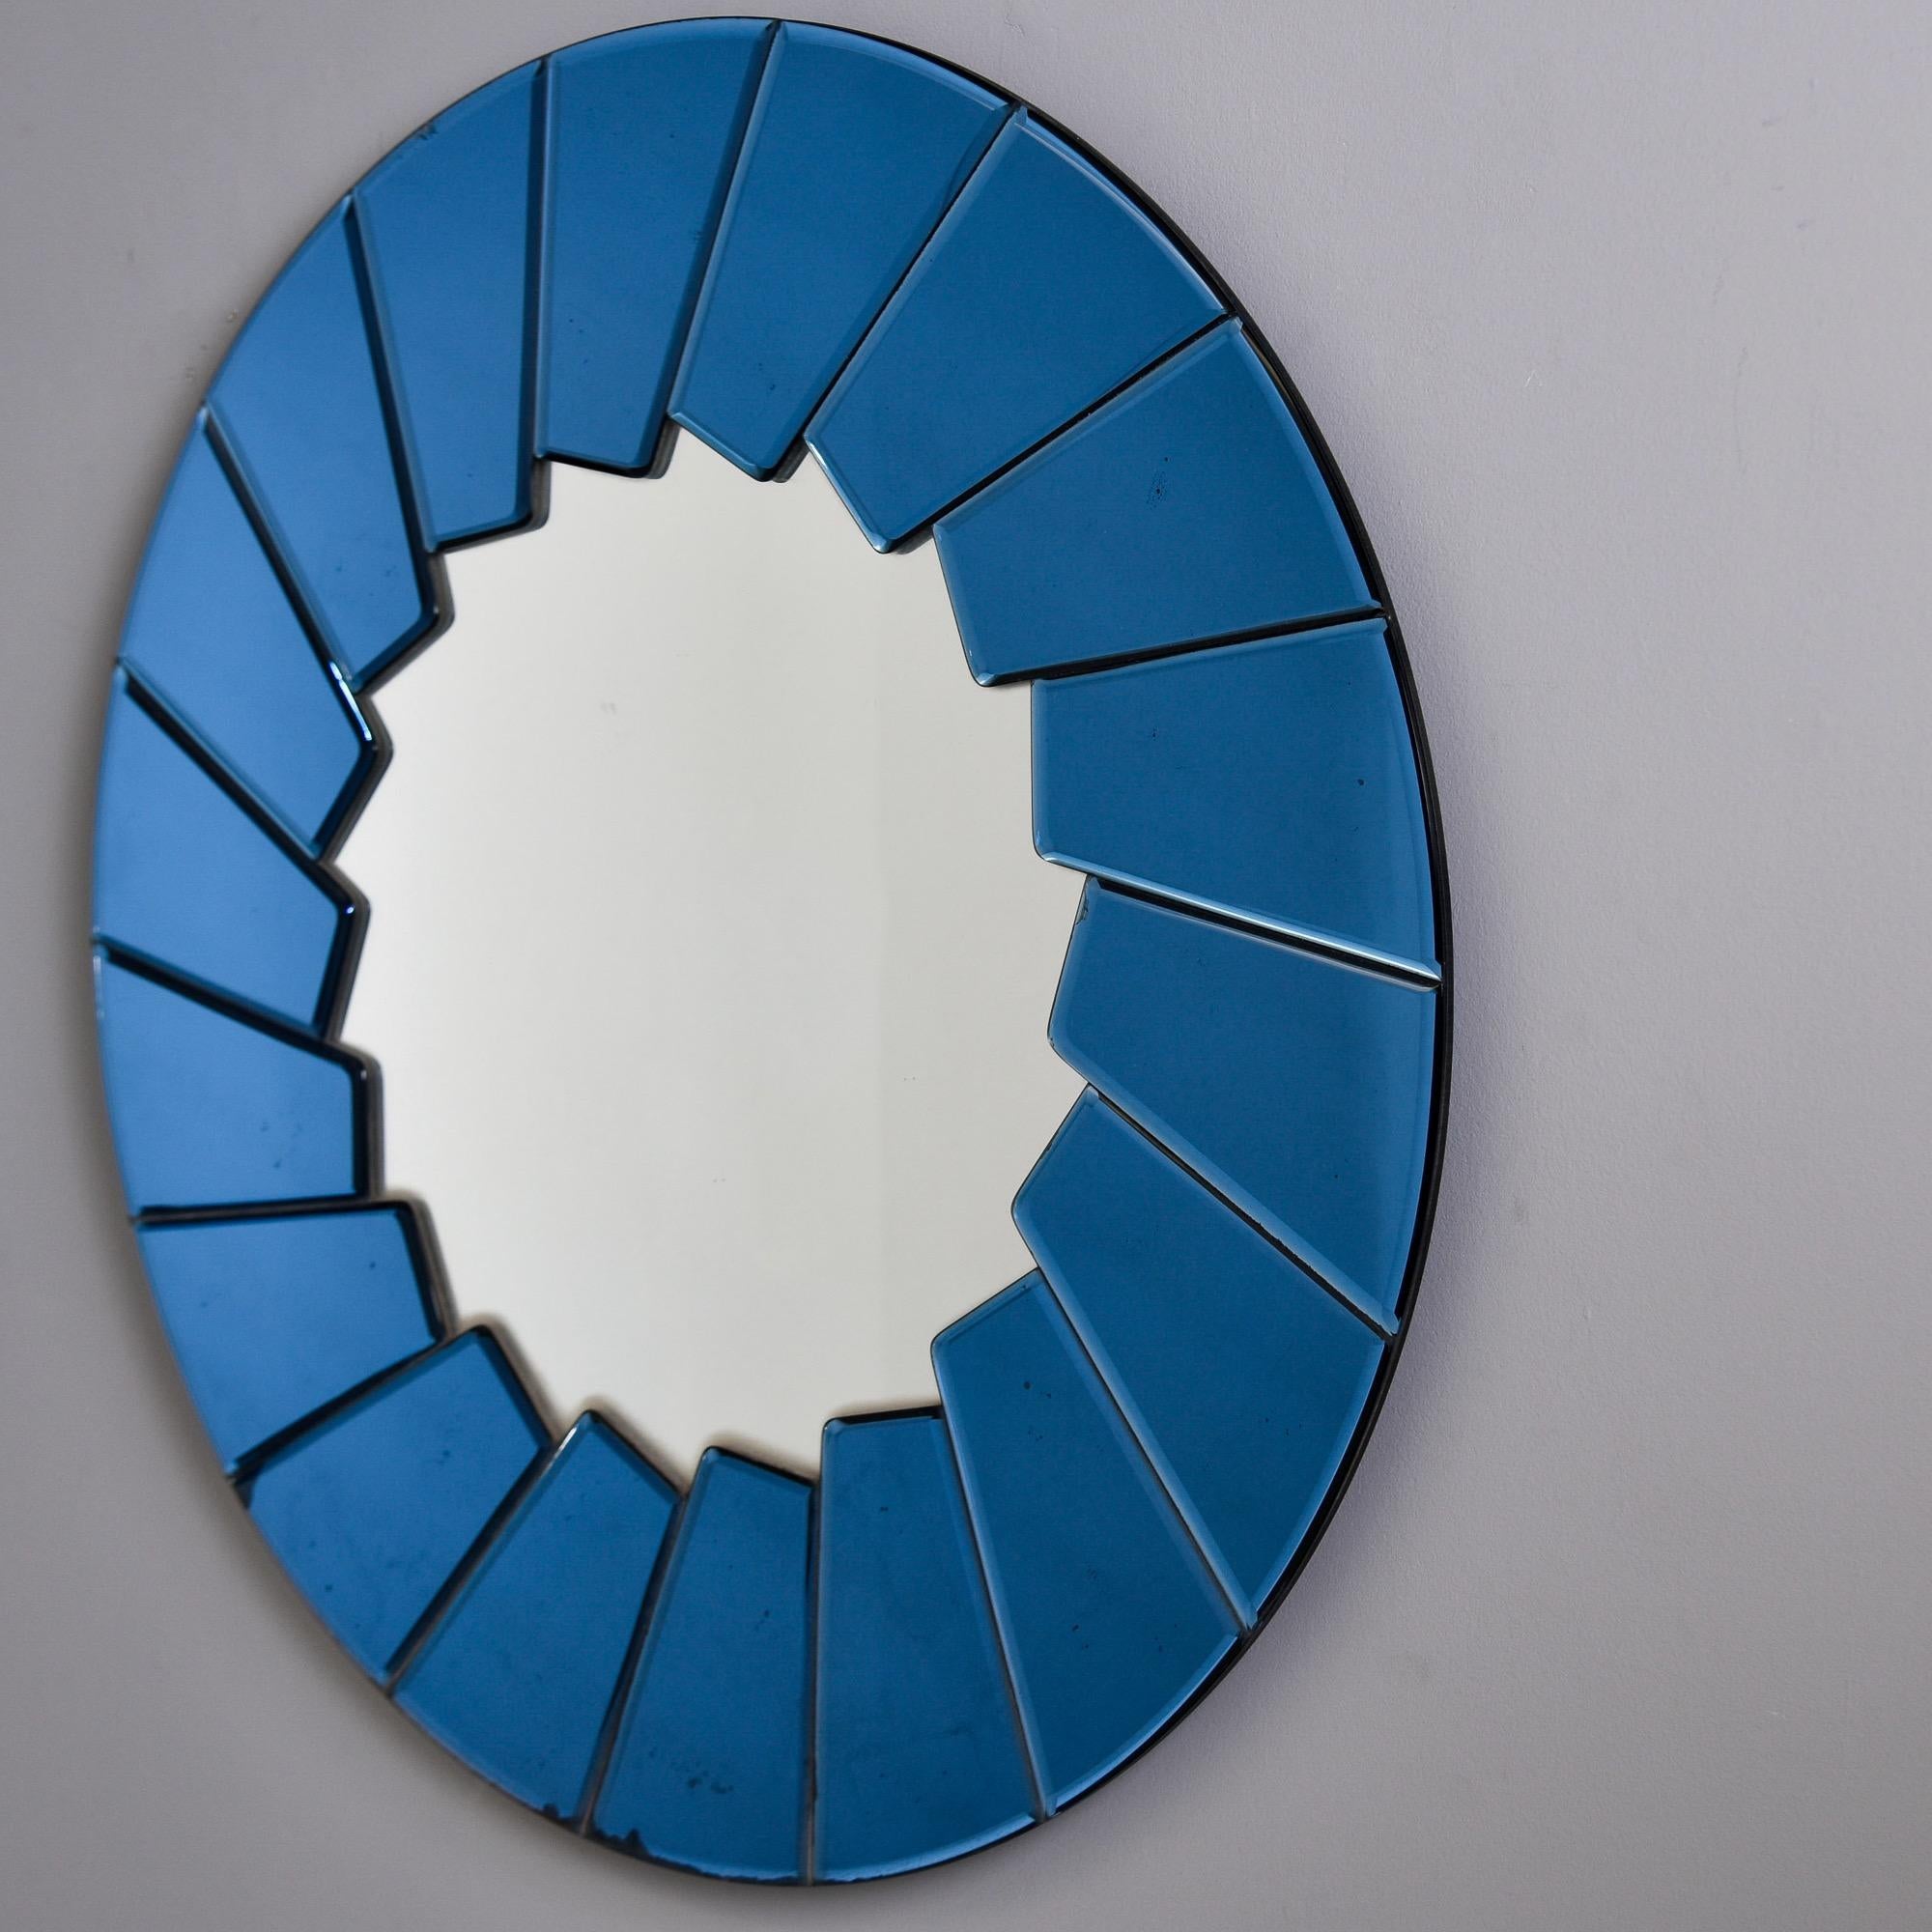 Italian Modernist Round Mirror with Blue Mirrored Edging For Sale 1